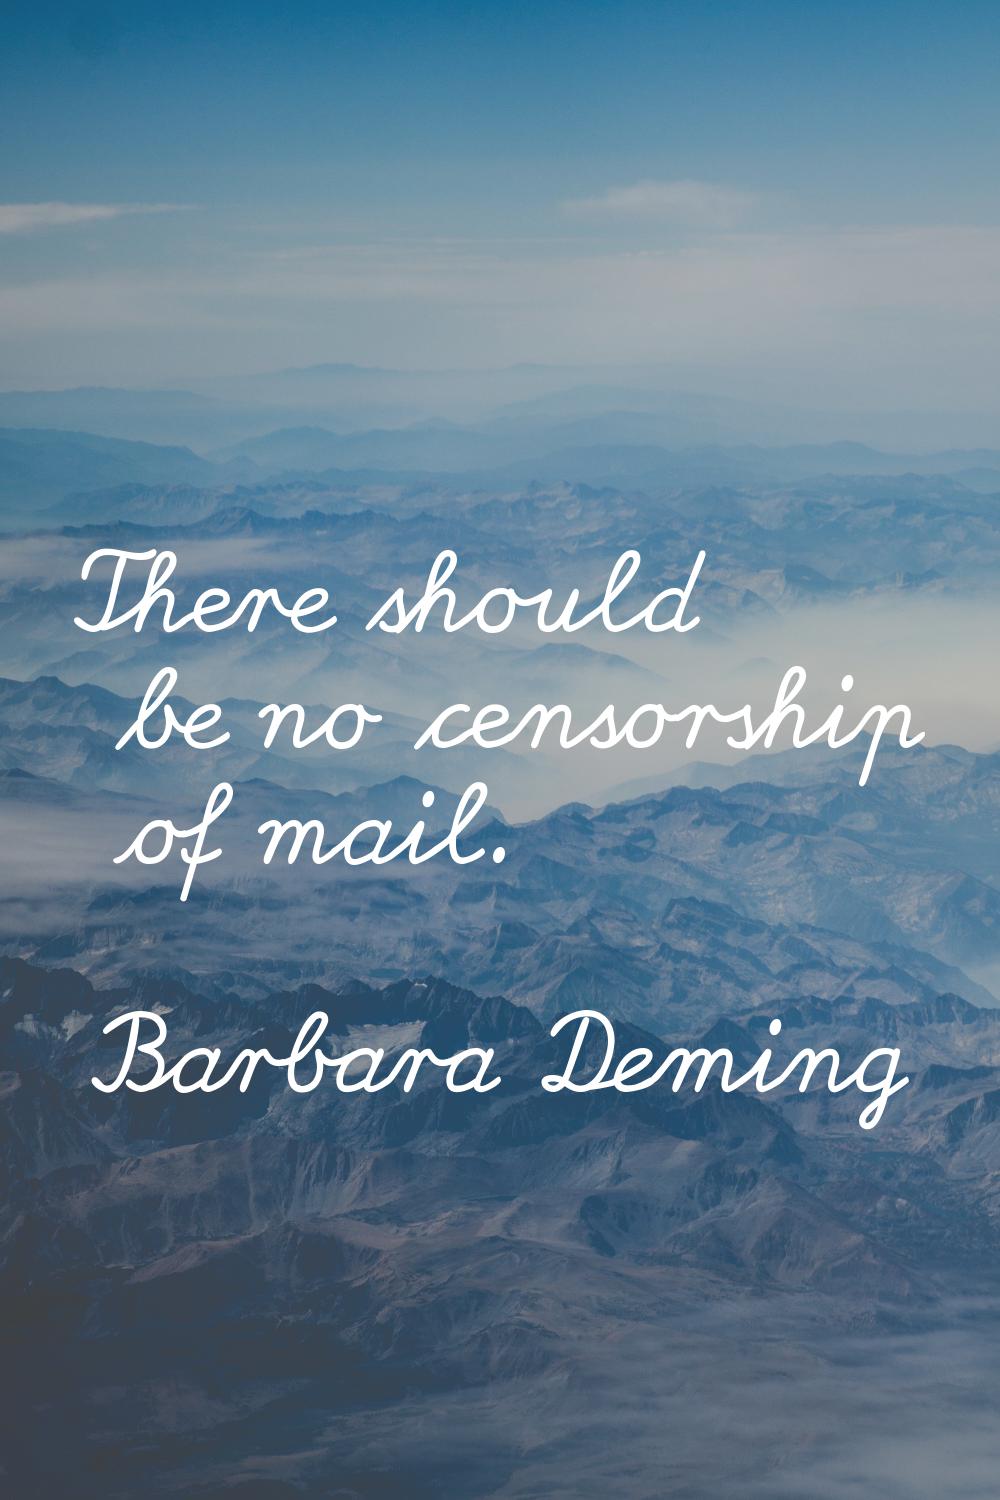 There should be no censorship of mail.